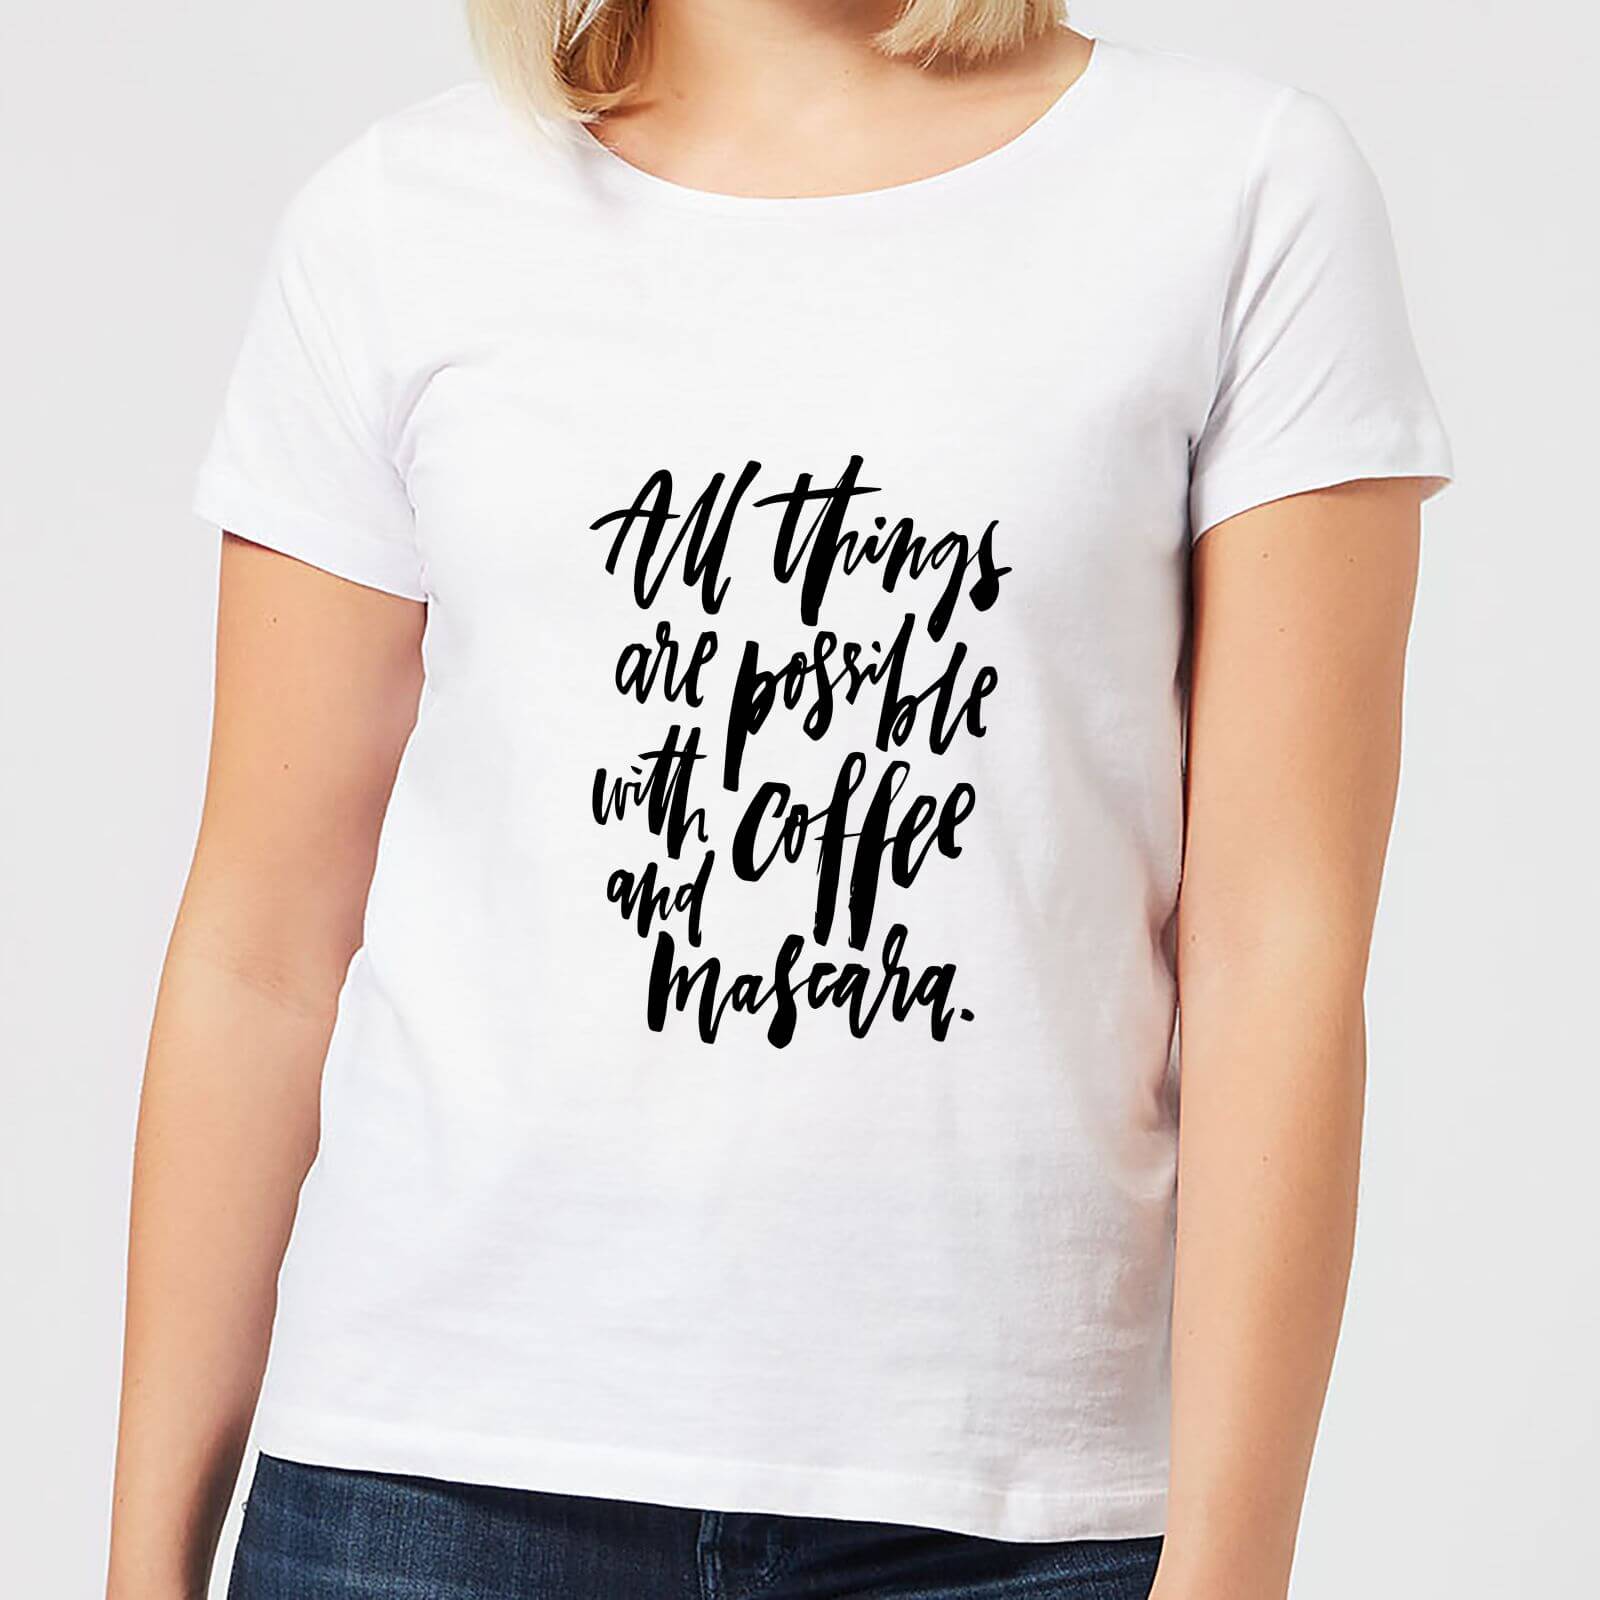 All Things Are Possible with Coffee and Mascara Women's T-Shirt - White - S - White